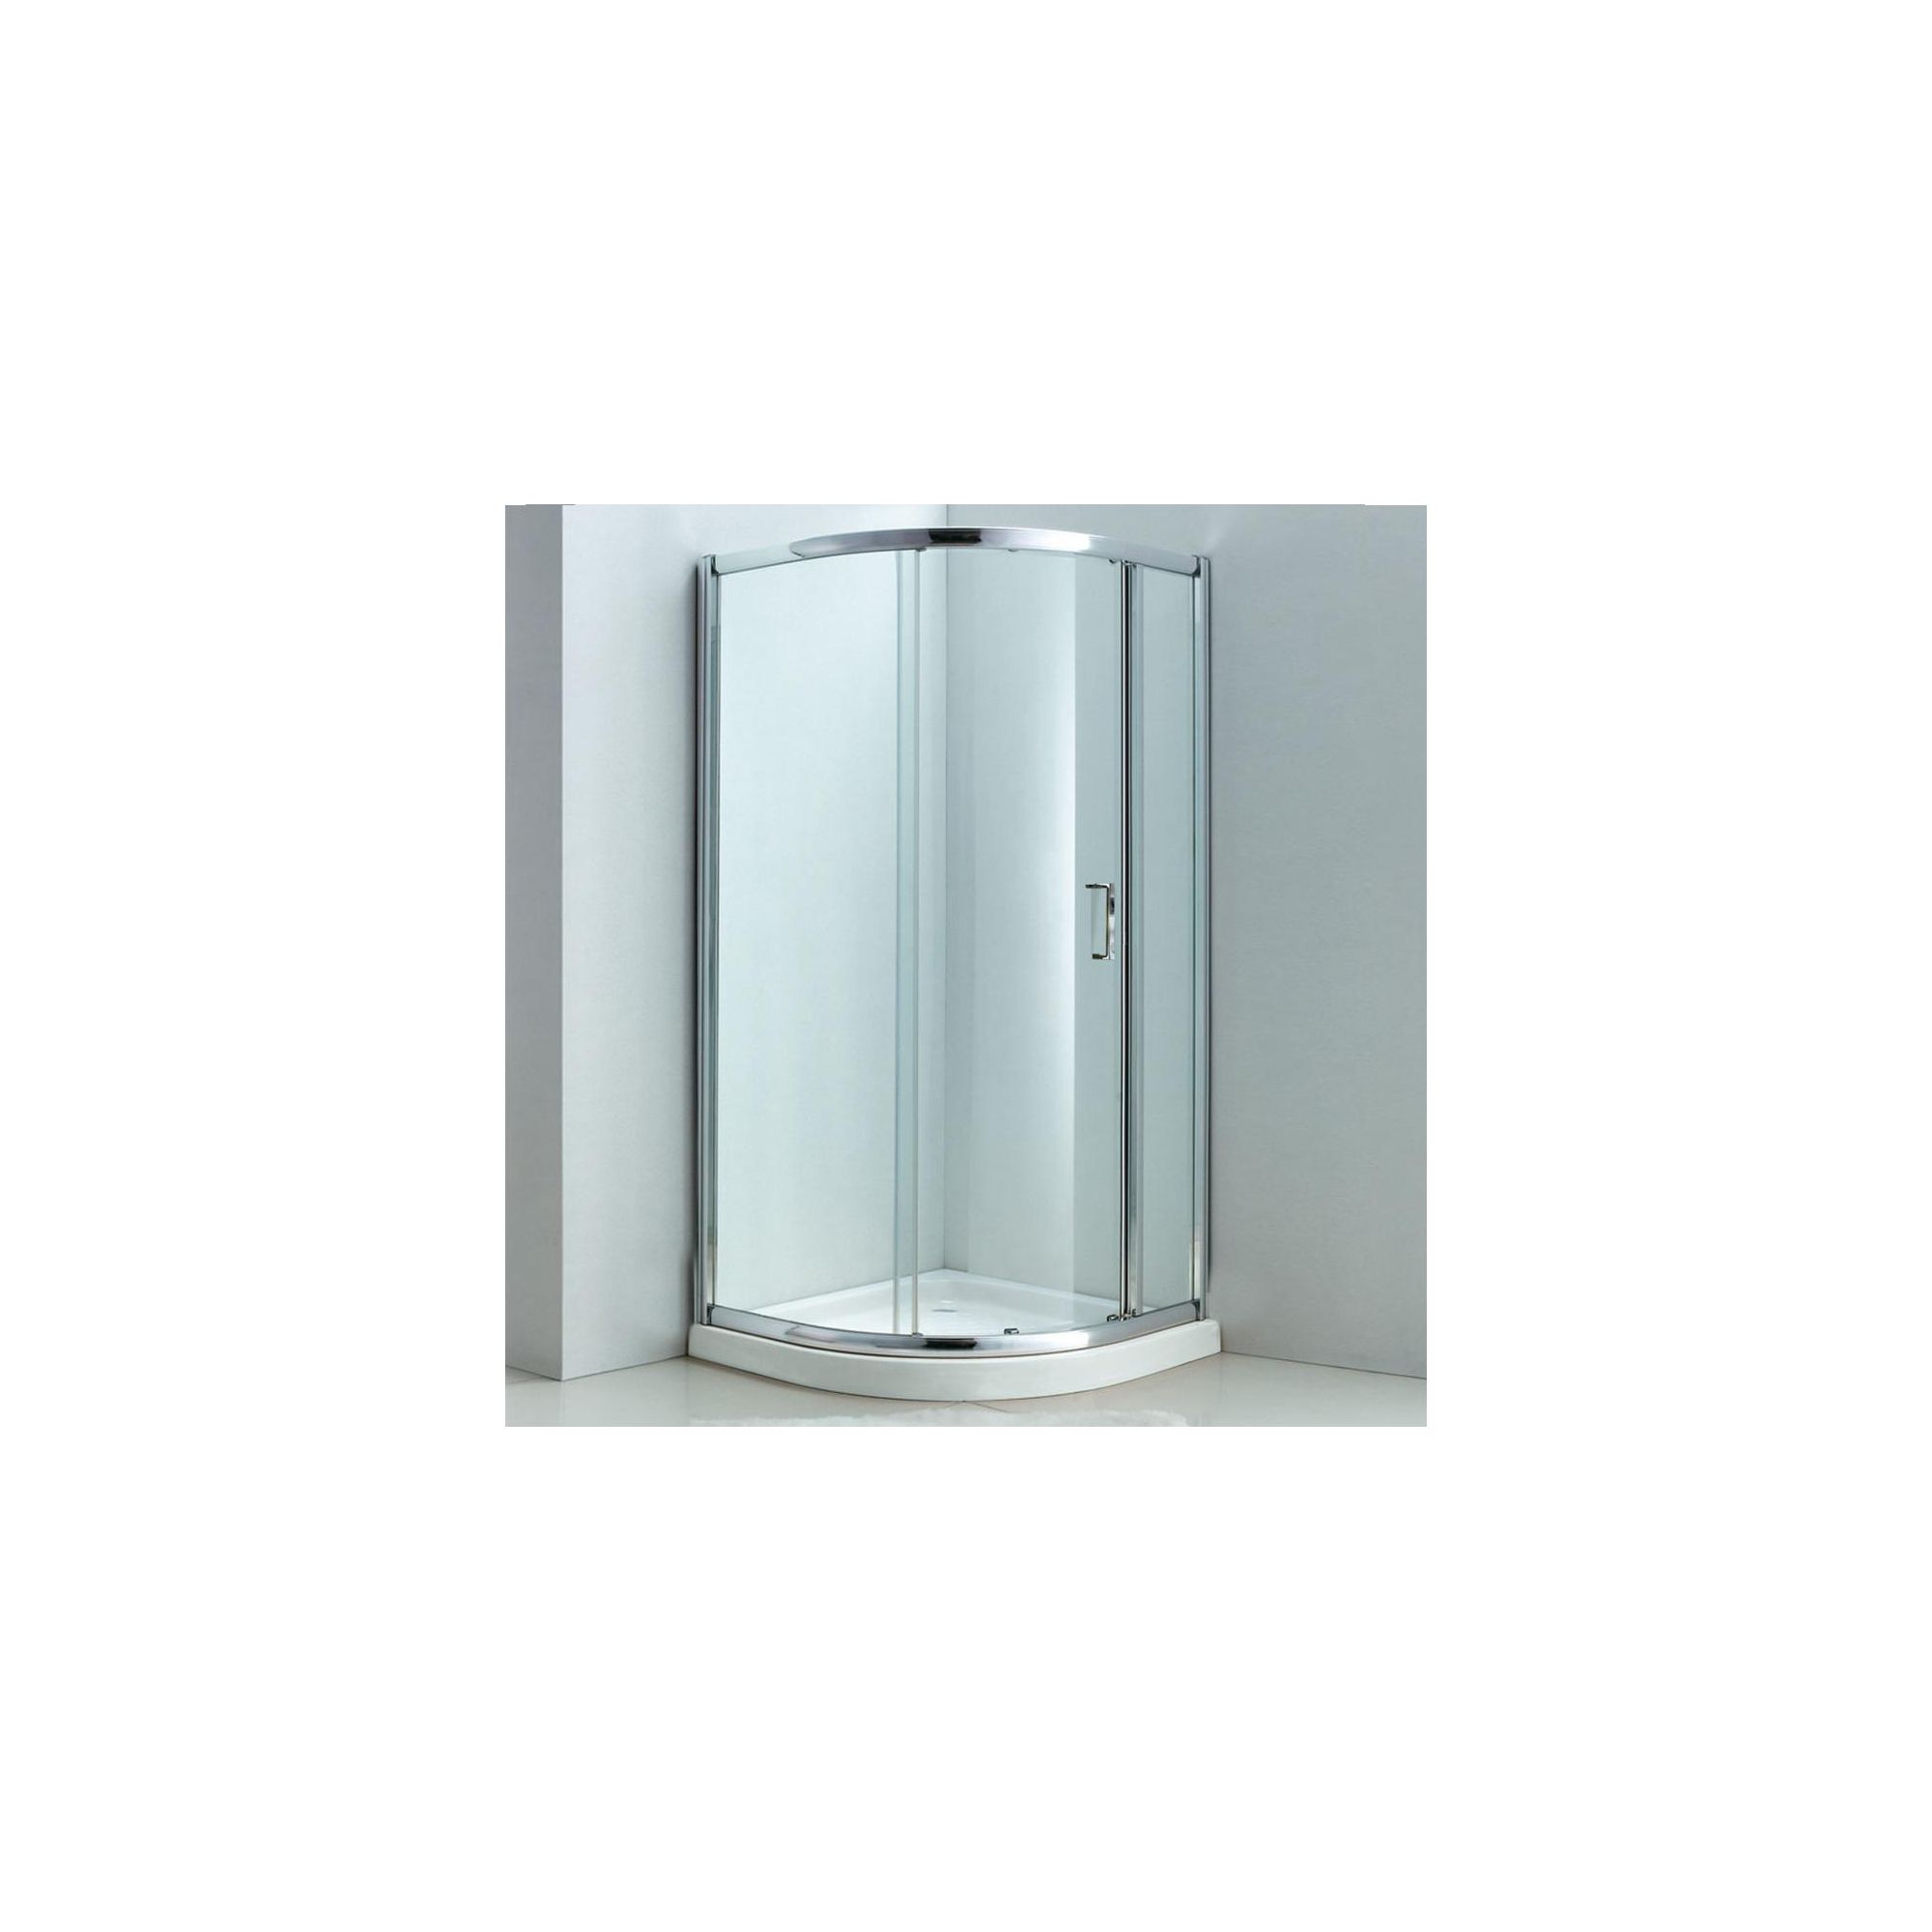 Duchy Style Single Quadrant Shower Door, 900mm x 900mm, 6mm Glass at Tesco Direct